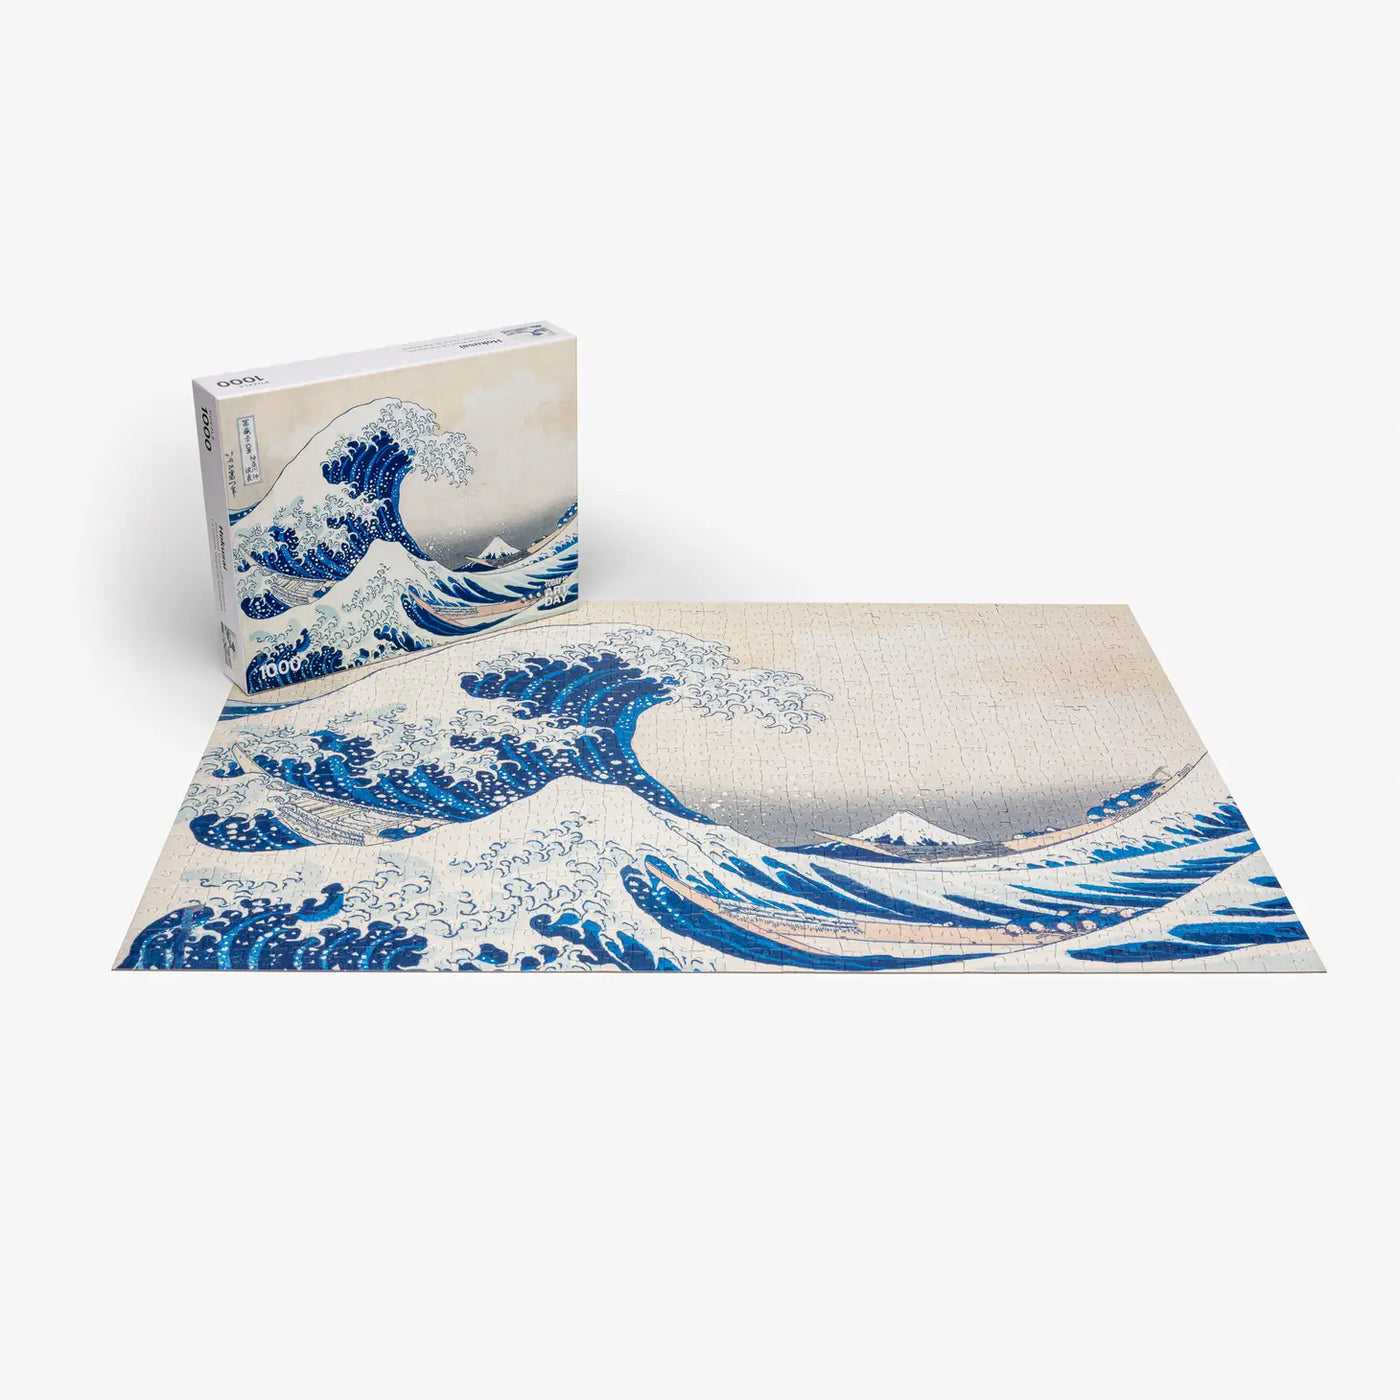 The Great Wave Off Kanagawa is a woodblock print by the Japanese ukiyo-e artist Hokusai. It is part of Hokusai’s thirty-six views of Mount Fuji series that secured his fame both in Japan and overseas. The mountain with a snow-capped peak is Mount Fuji, which in Japan is considered sacred and a symbol of national identity. Sometimes assumed to be a tsunami, the wave is more likely to be a large rogue wave. It is about to strike three boats, symbolizing the force of nature and the weakness of human being